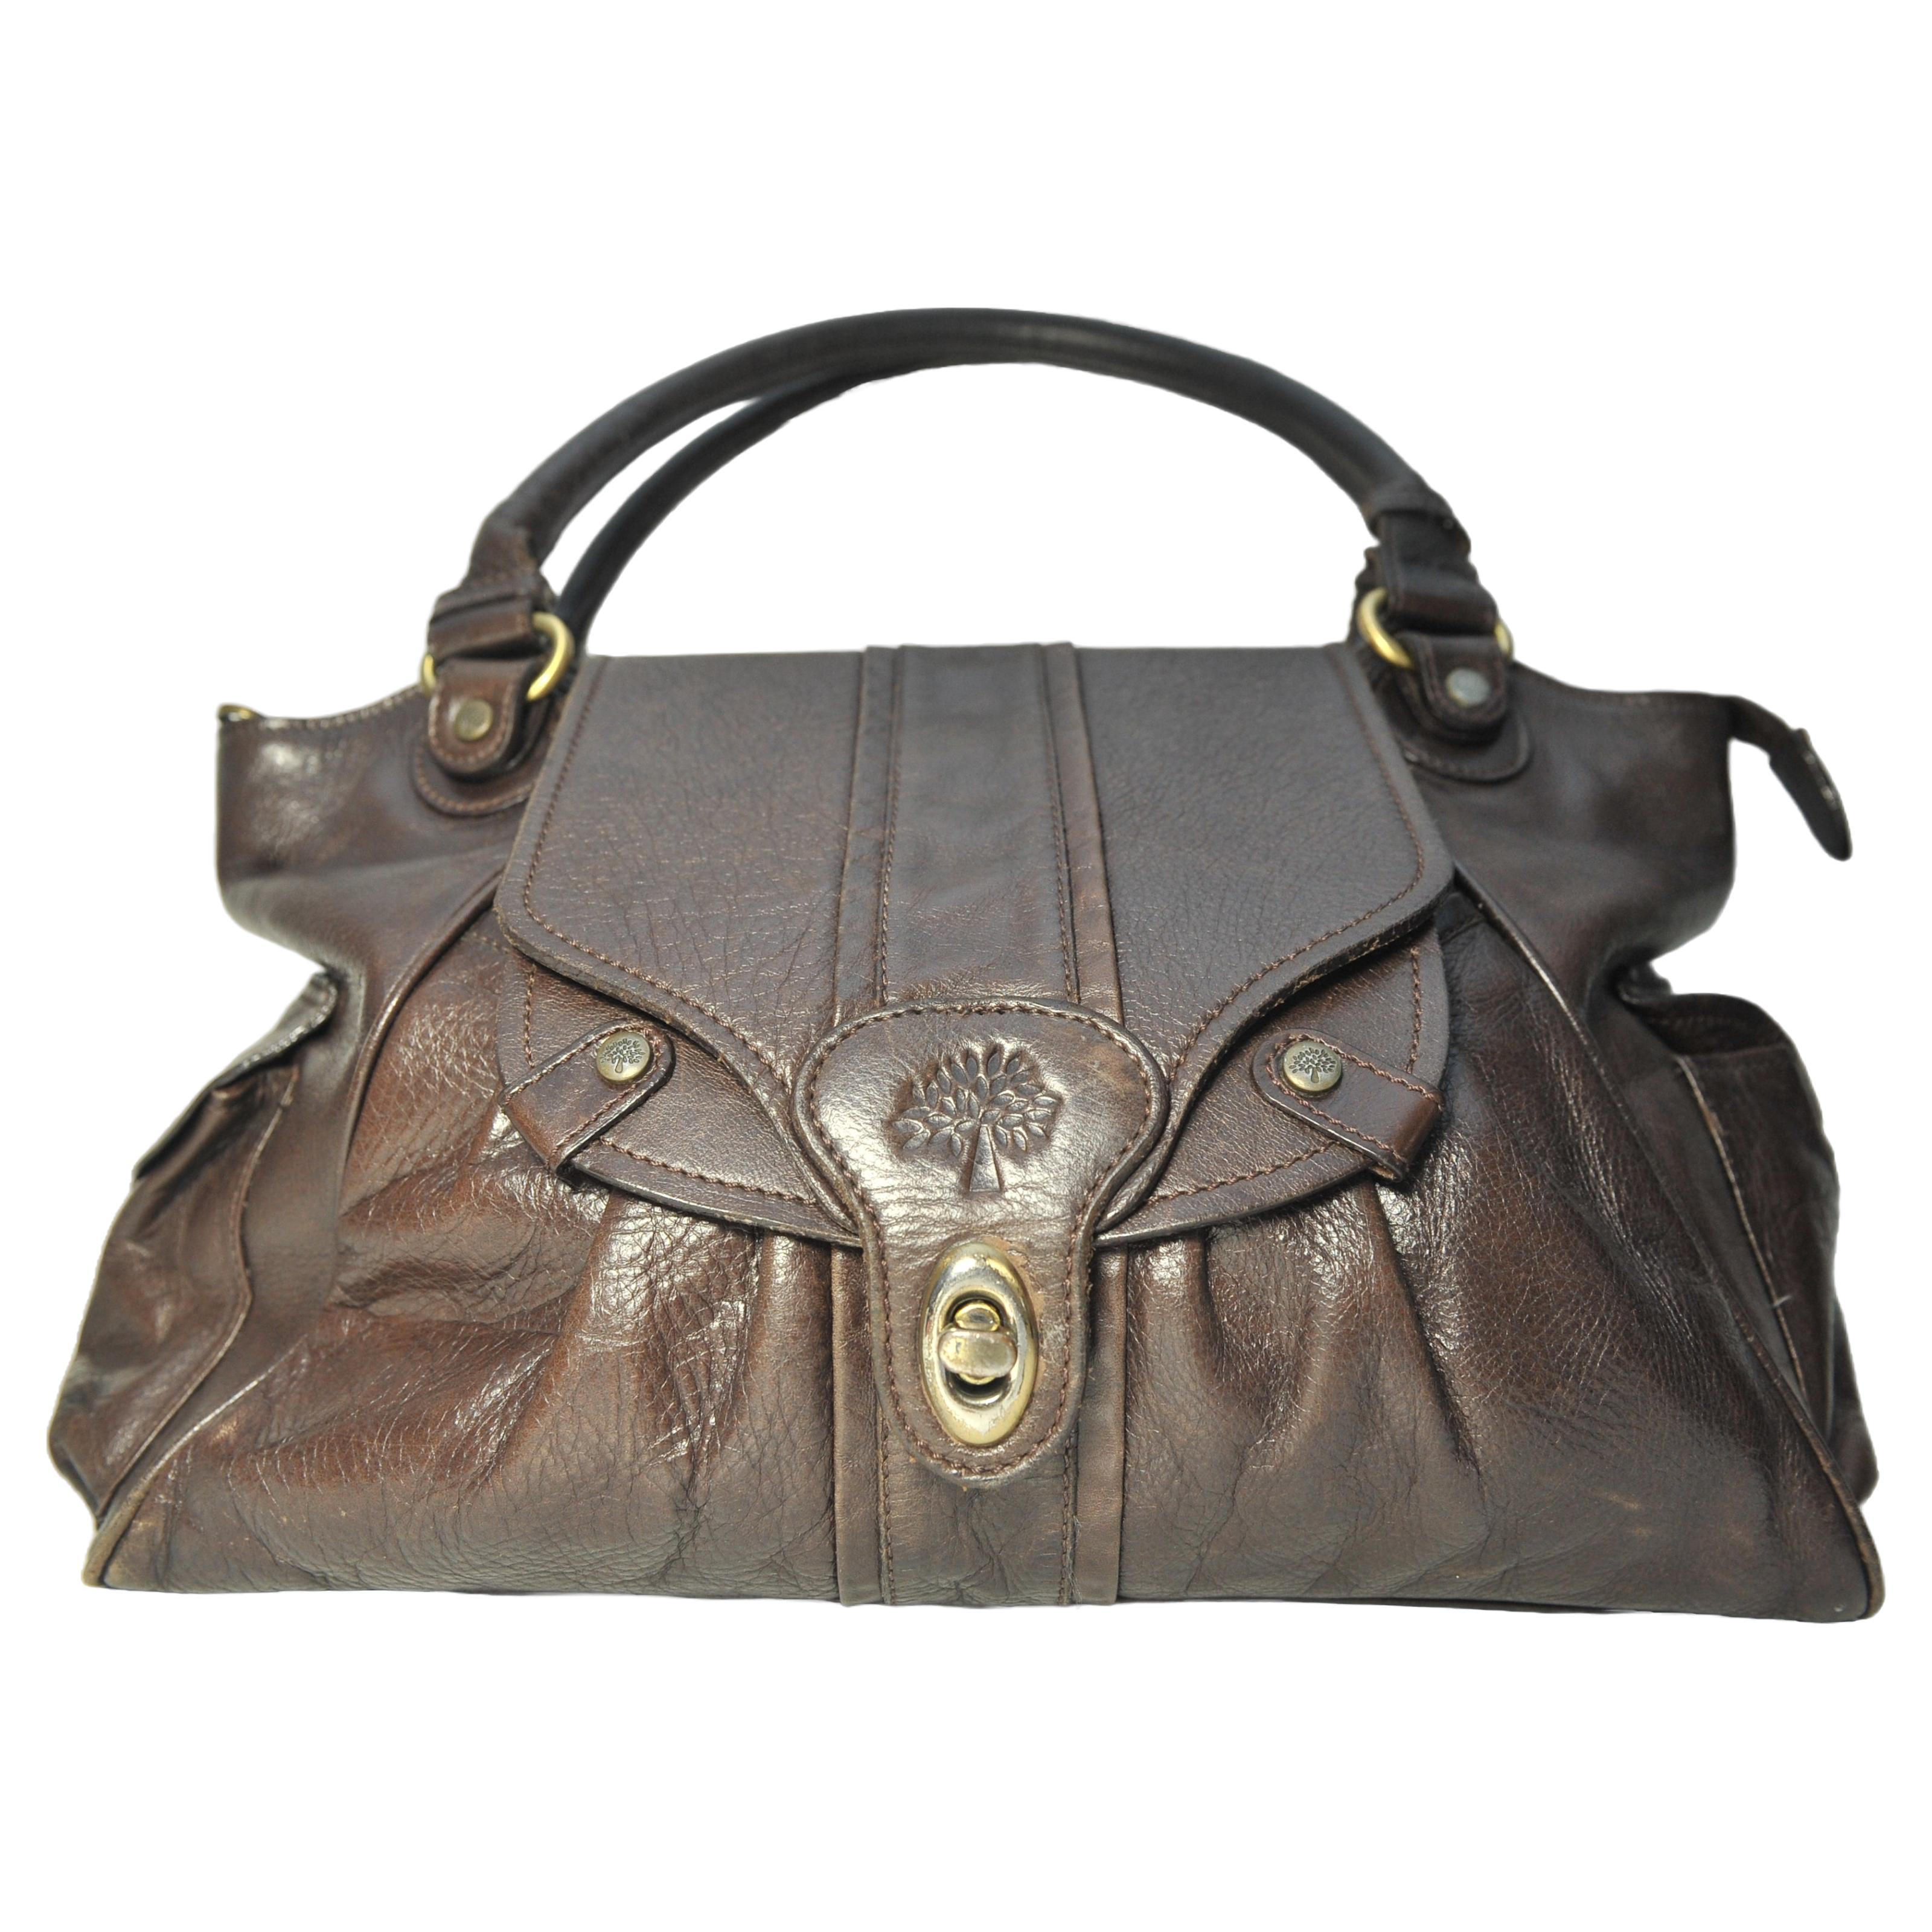 Mulberry Brown Leather Ladies Handbag With Original Maroon Mulberry Dust Bag For Sale